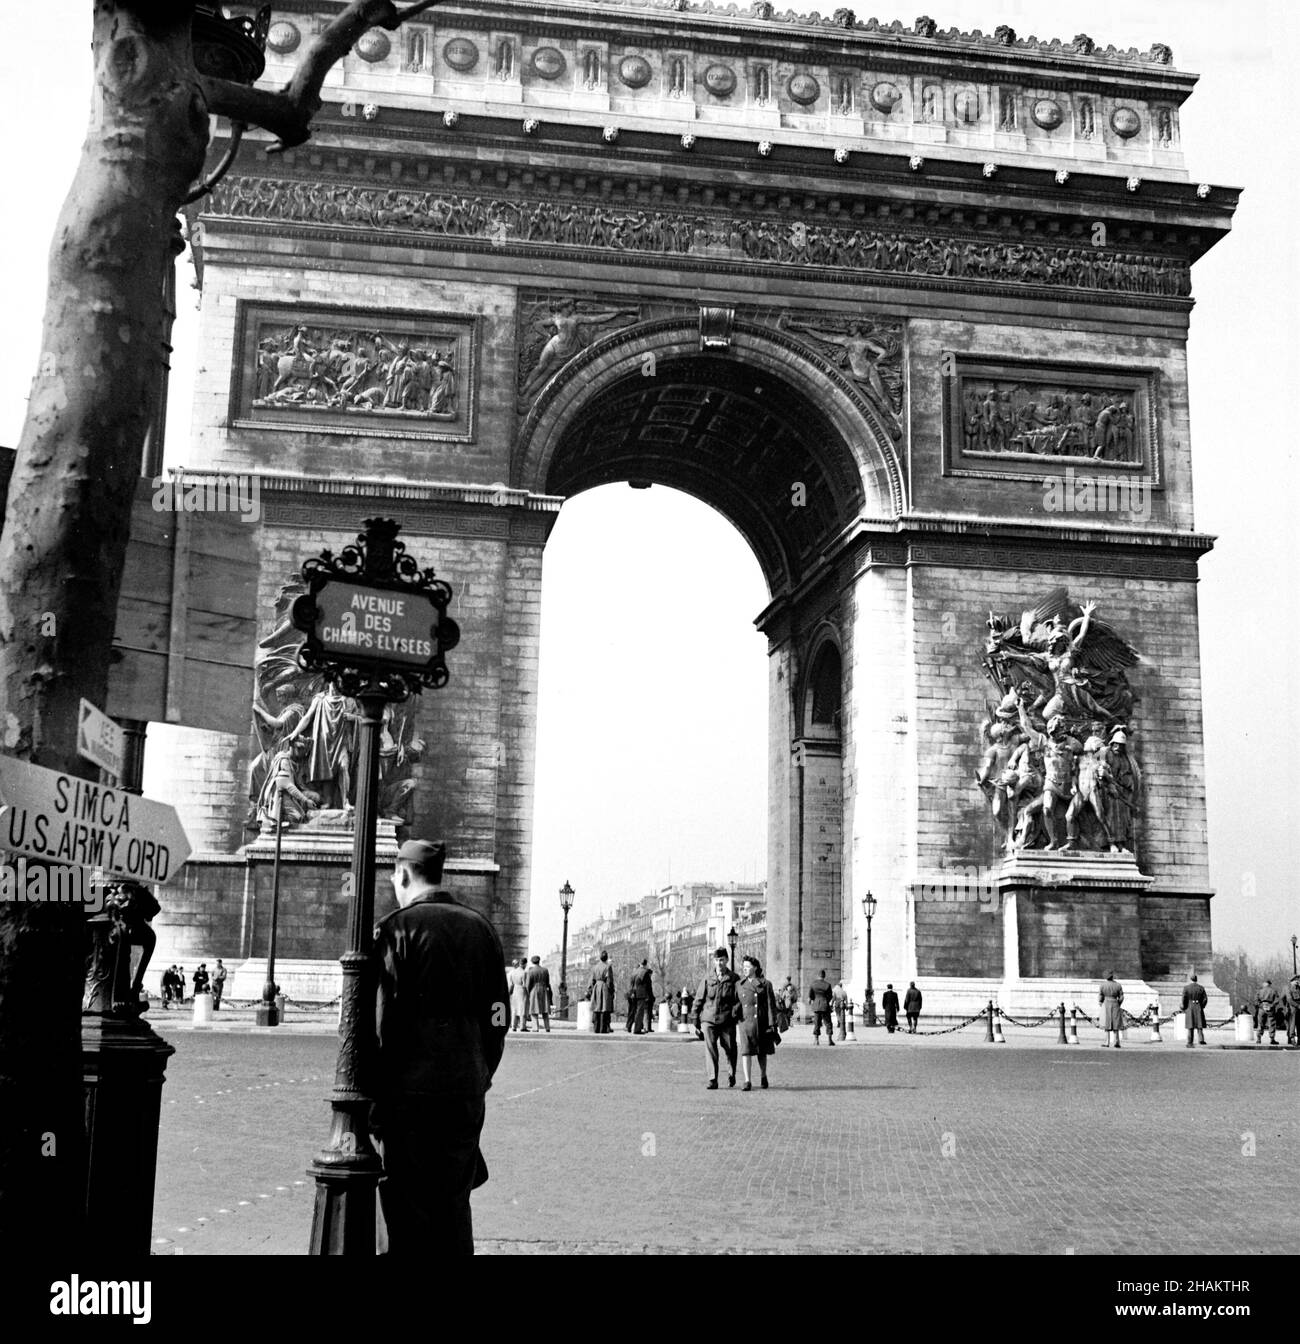 Paris Arc de Triomphe at Place de l Etoile and Champs-Elysees with no vehicles, 1945. The iconic arch takes up most of the square image. Place de l Etoile looks more like a pedestrian plaza then a motorway as no vehicles are in sight. The camera position is where the Avenue des Champs-Elysees ends at the Place de l Etoile. American service personal are visible both in the near ground and middle ground of the image. A stenciled direction sign posted on a tree reads SIMCA US Army ORD. Stock Photo